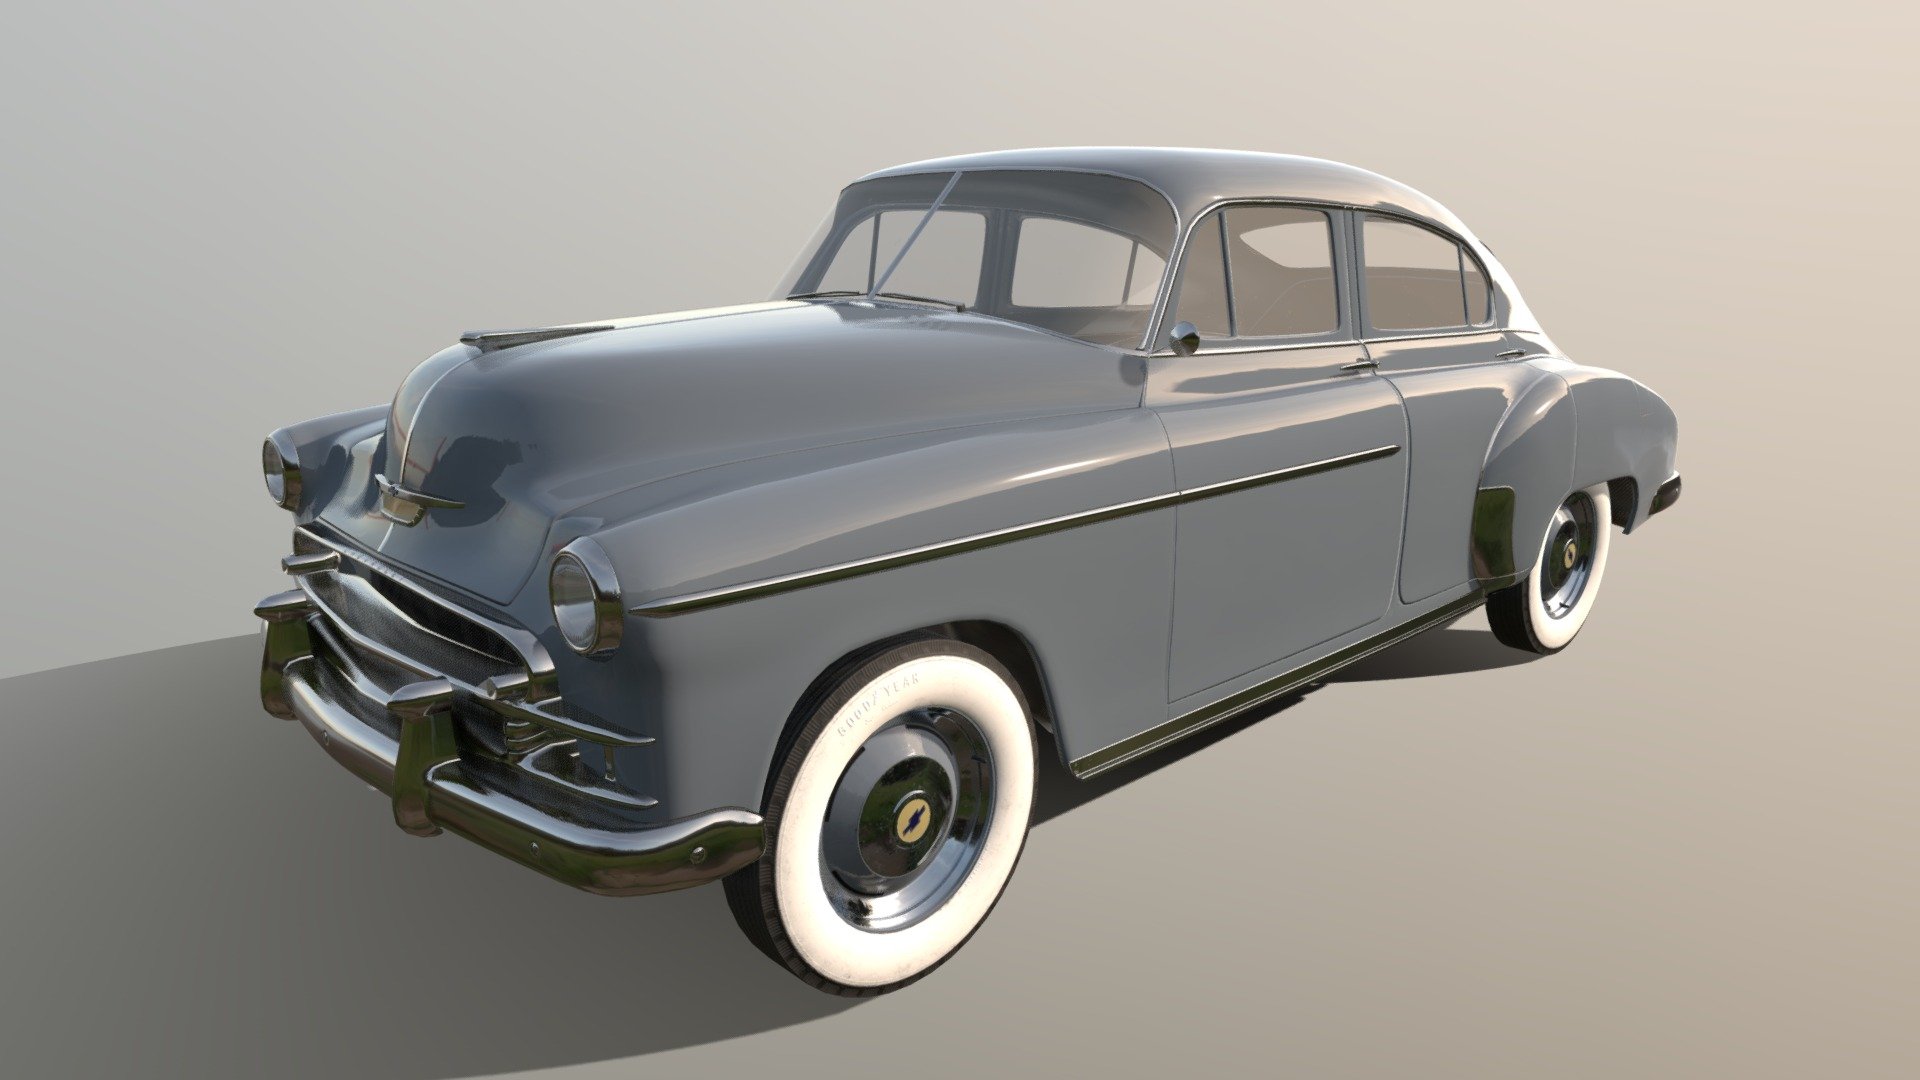 This is a 1950 Chevrolet Fleetline Deluxe Coupe exterior modeled in Maya 2020 and textured in Substance Painter as a side project. The model has 2 sets of textures, one for the body and one for the wheels 3d model